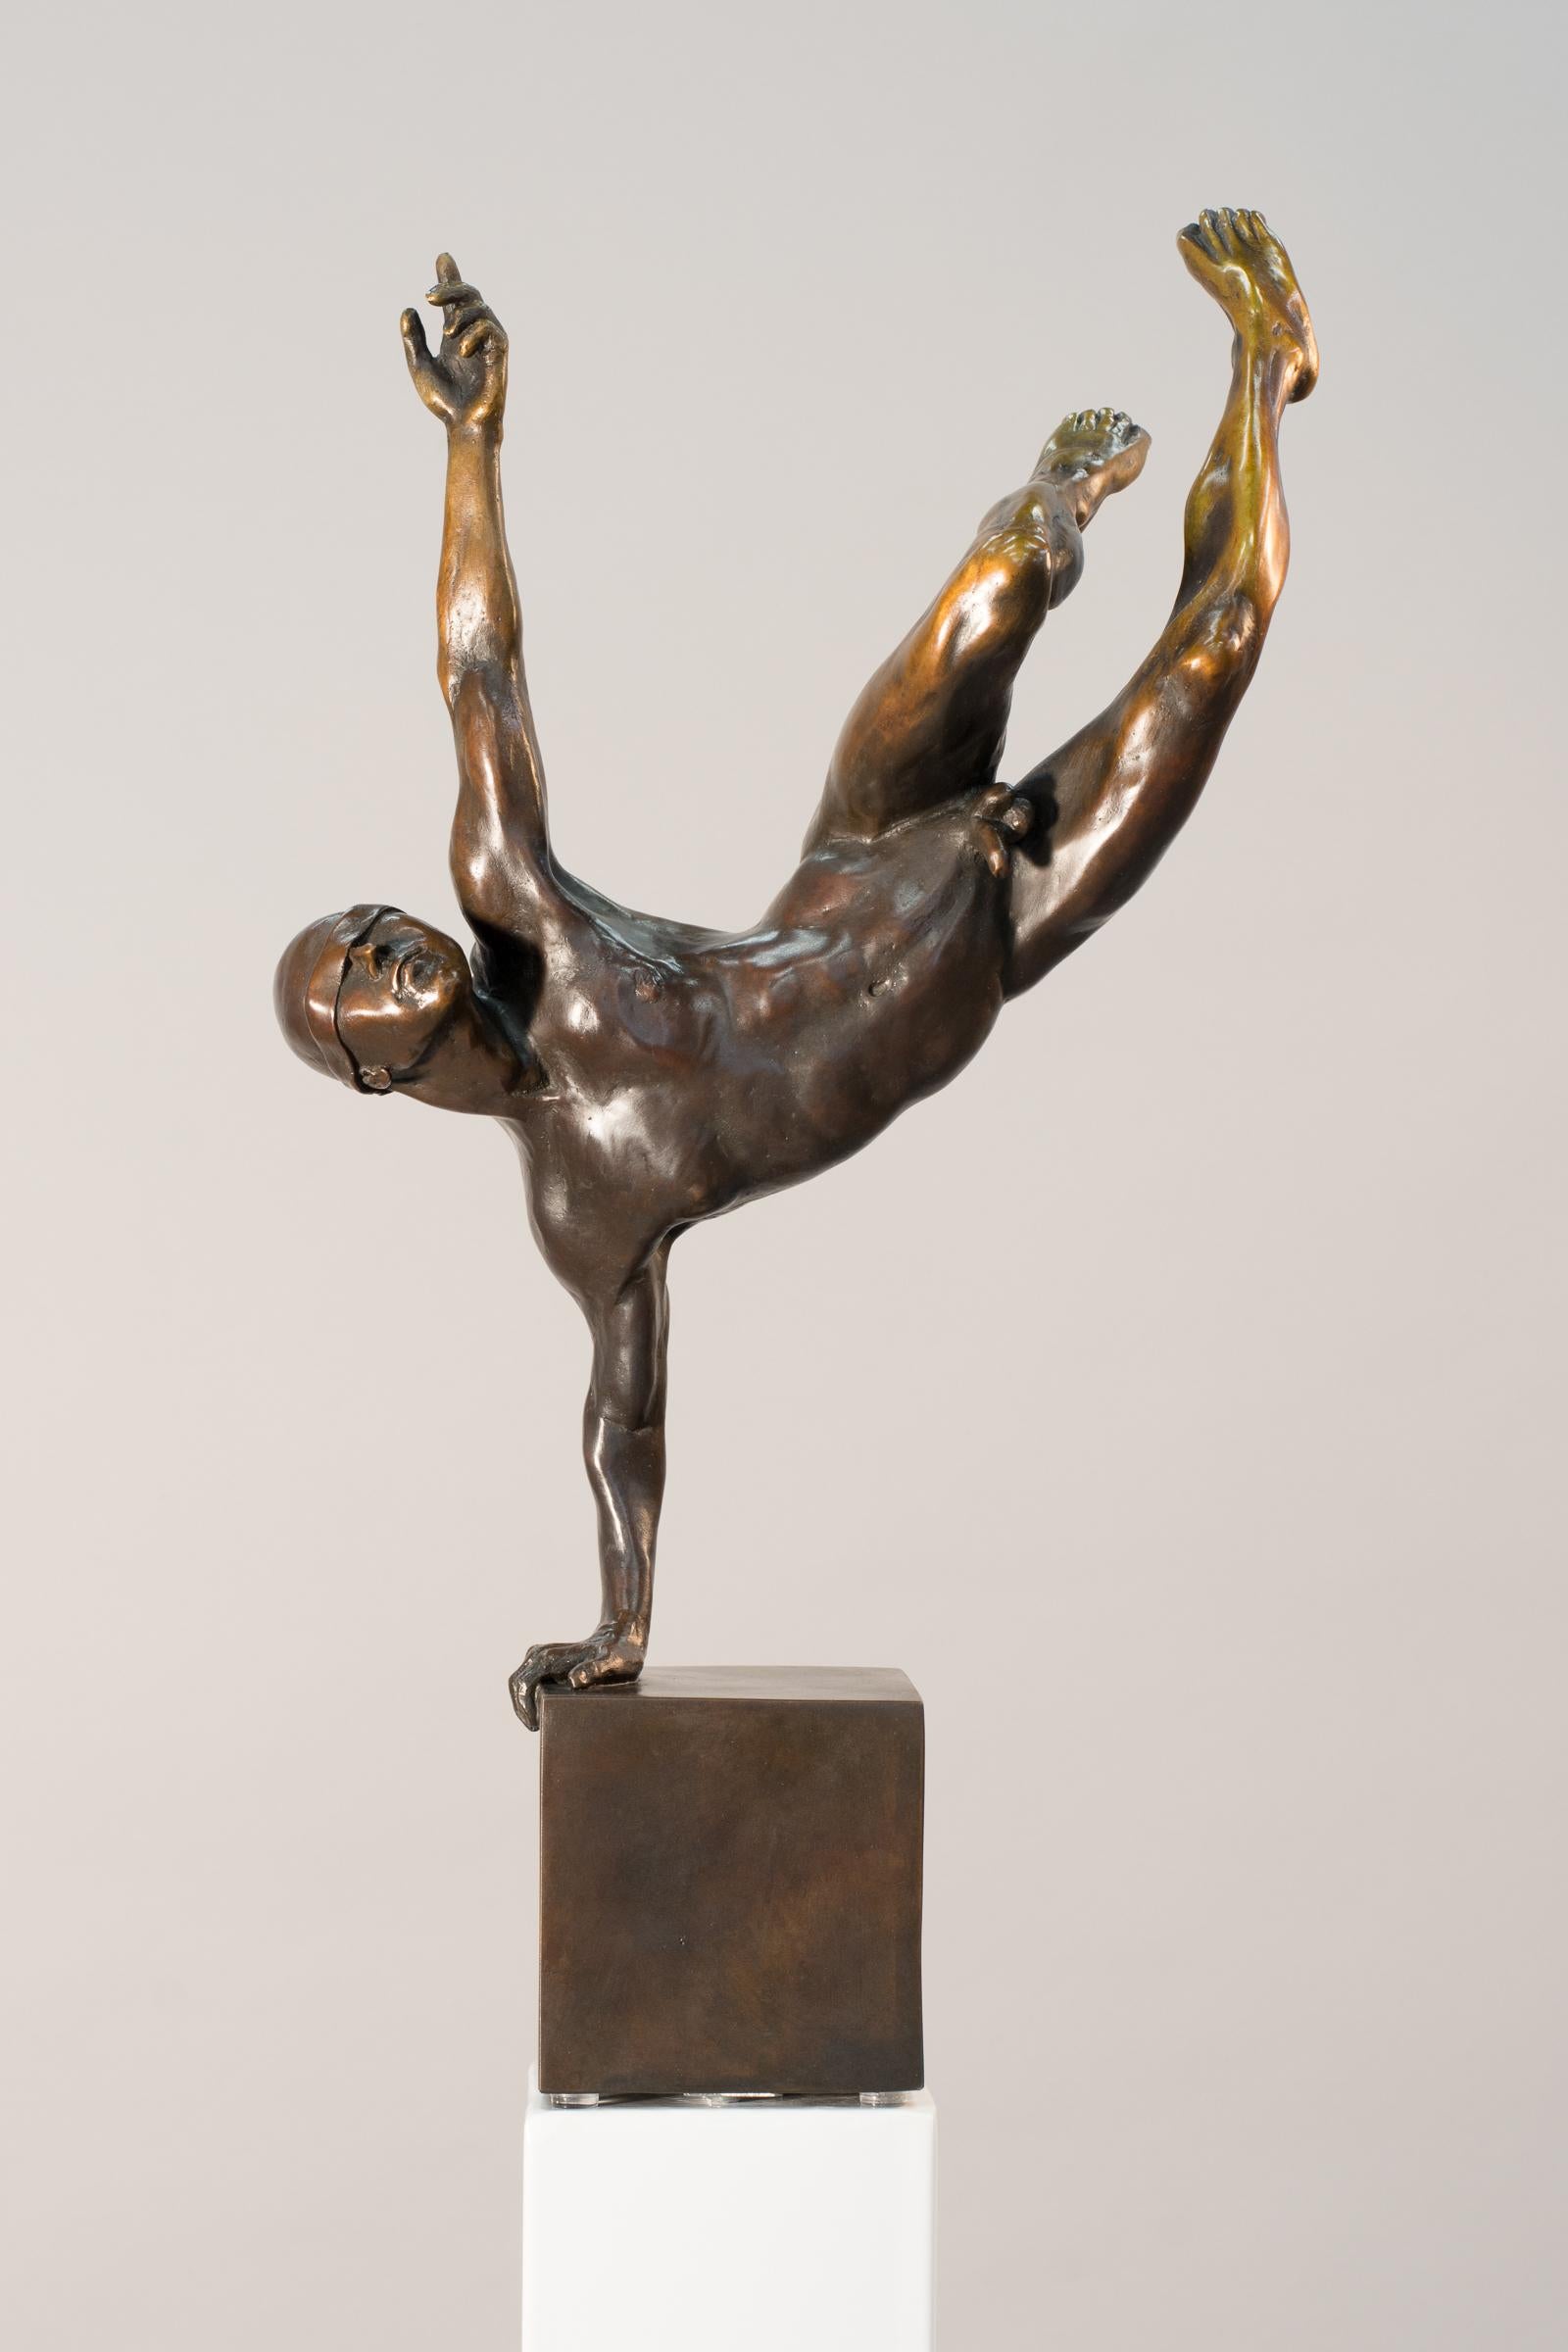 W.W. Hung Figurative Sculpture - Yearning 2/9 - male, nude, figurative, statuette, bronze sculpture